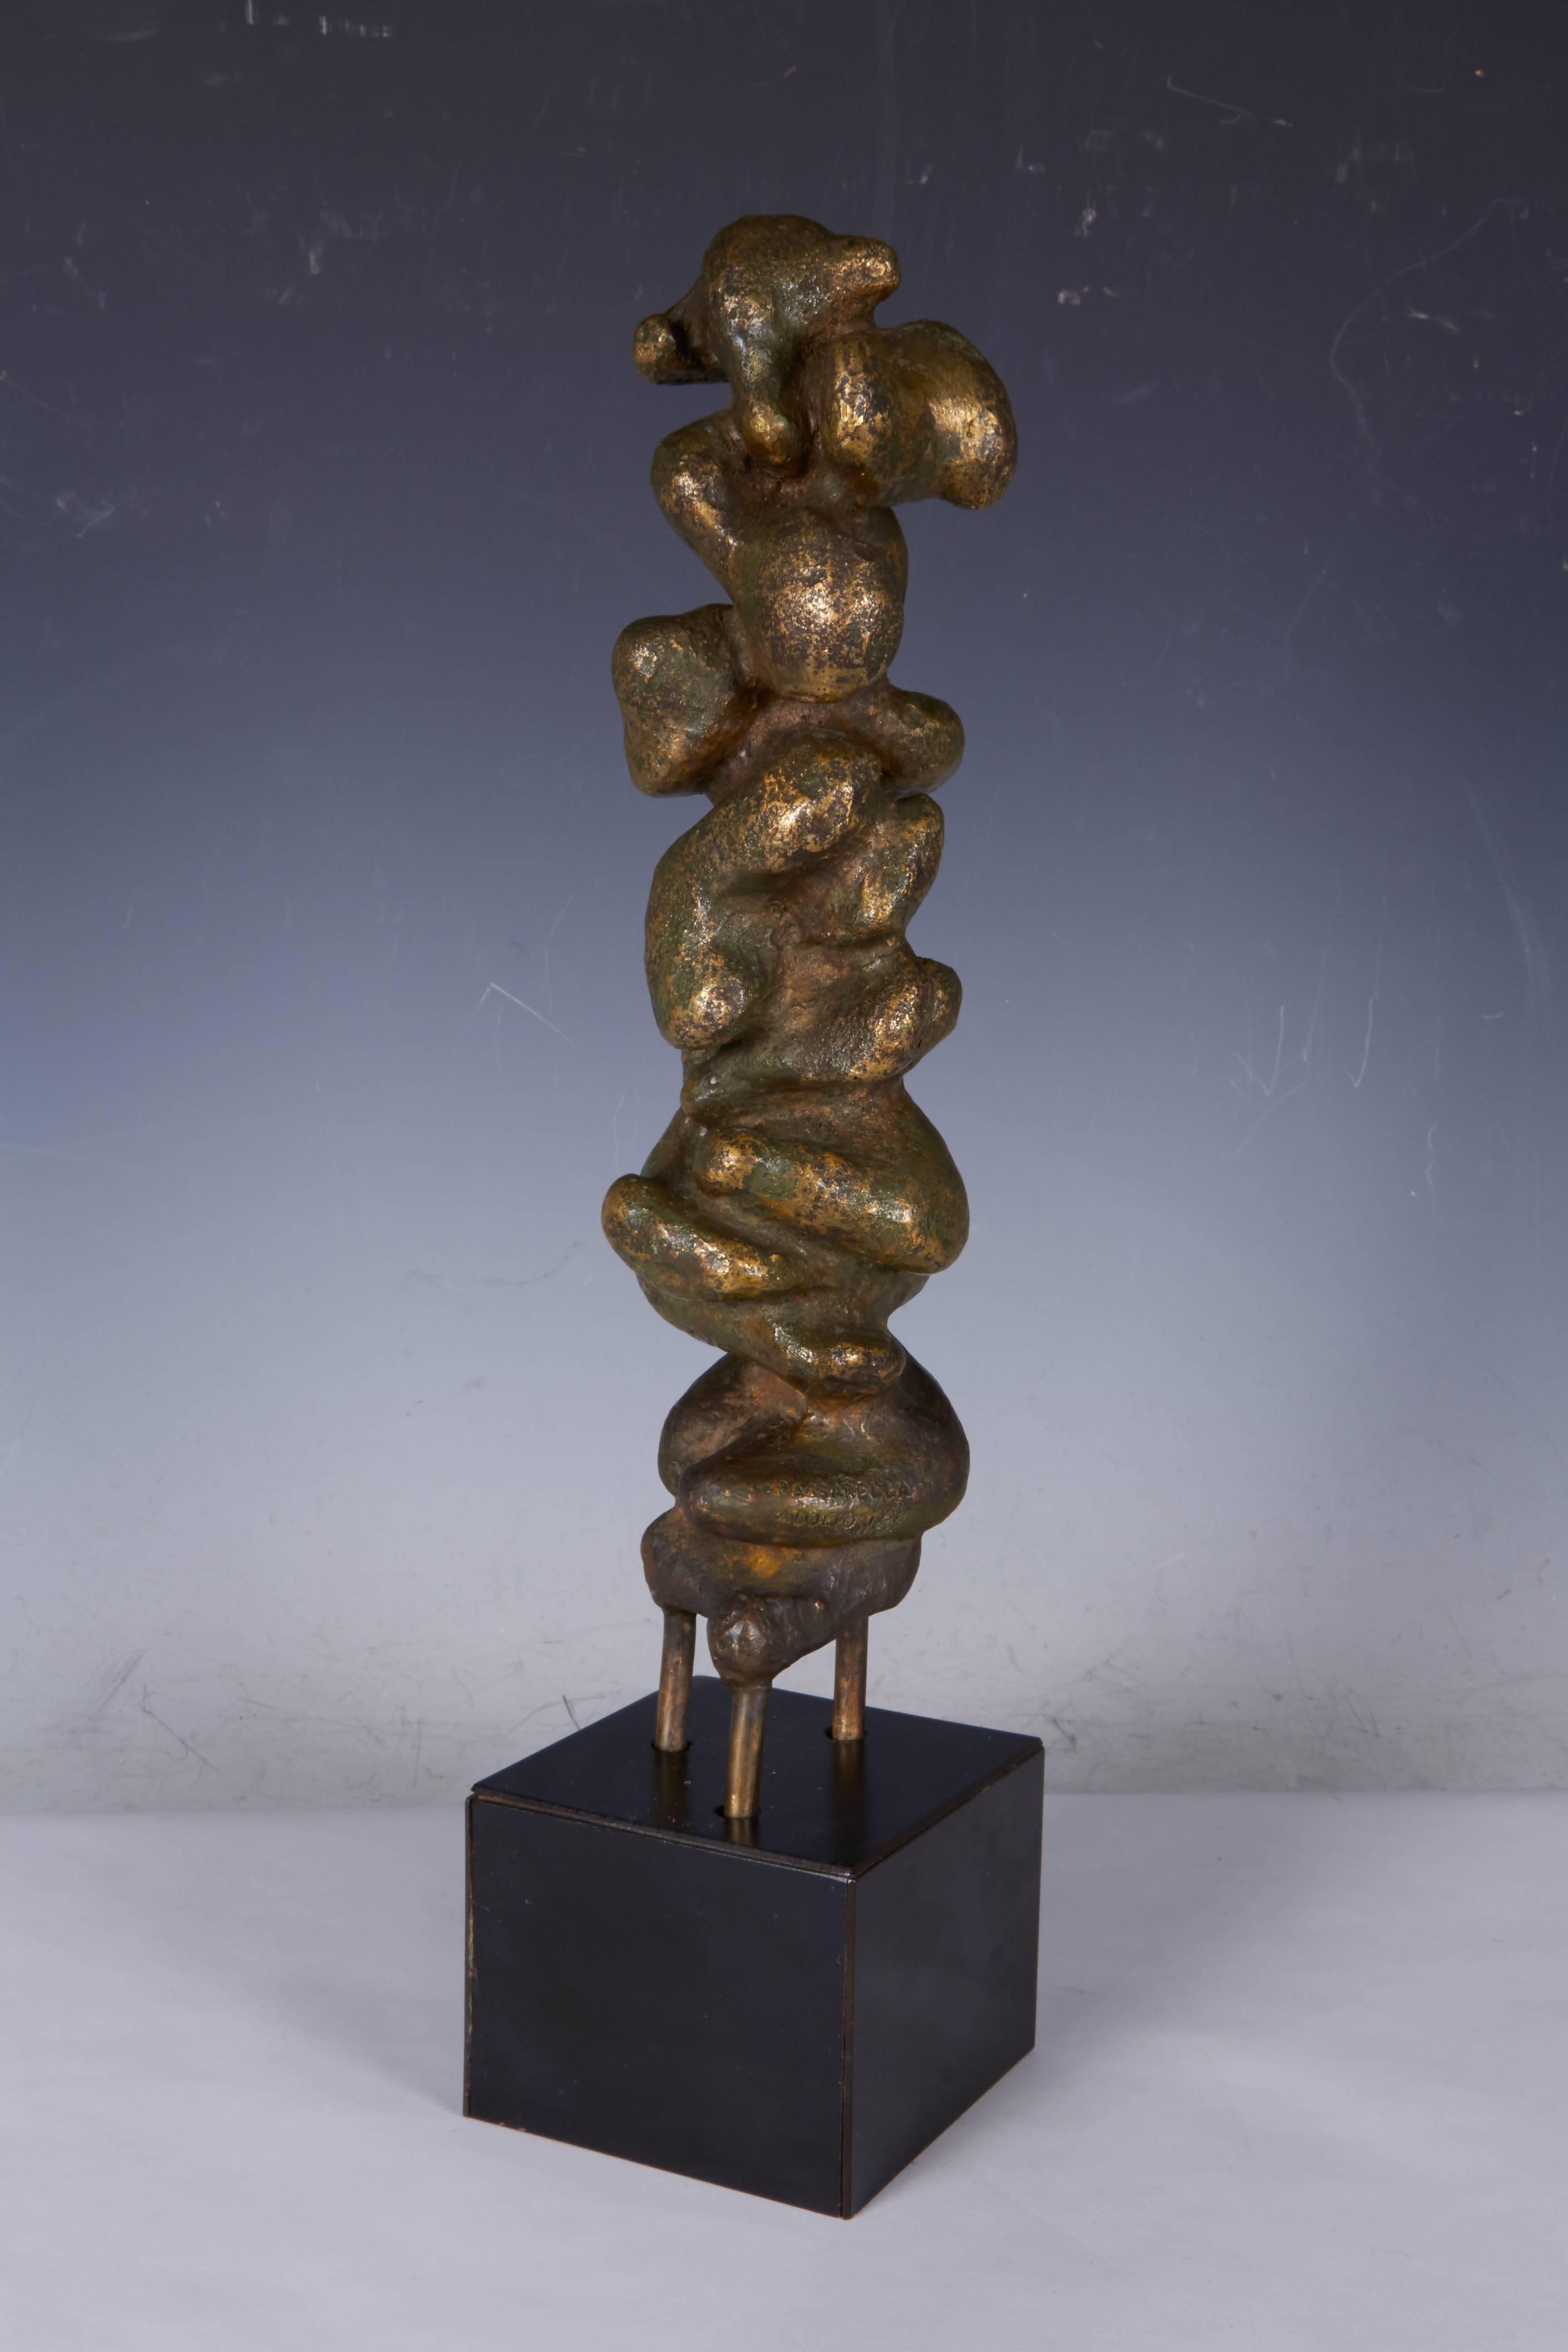 Laminate Adolfo Passarella Brutalist Abstract Bronze Sculpture, Signed and Dated